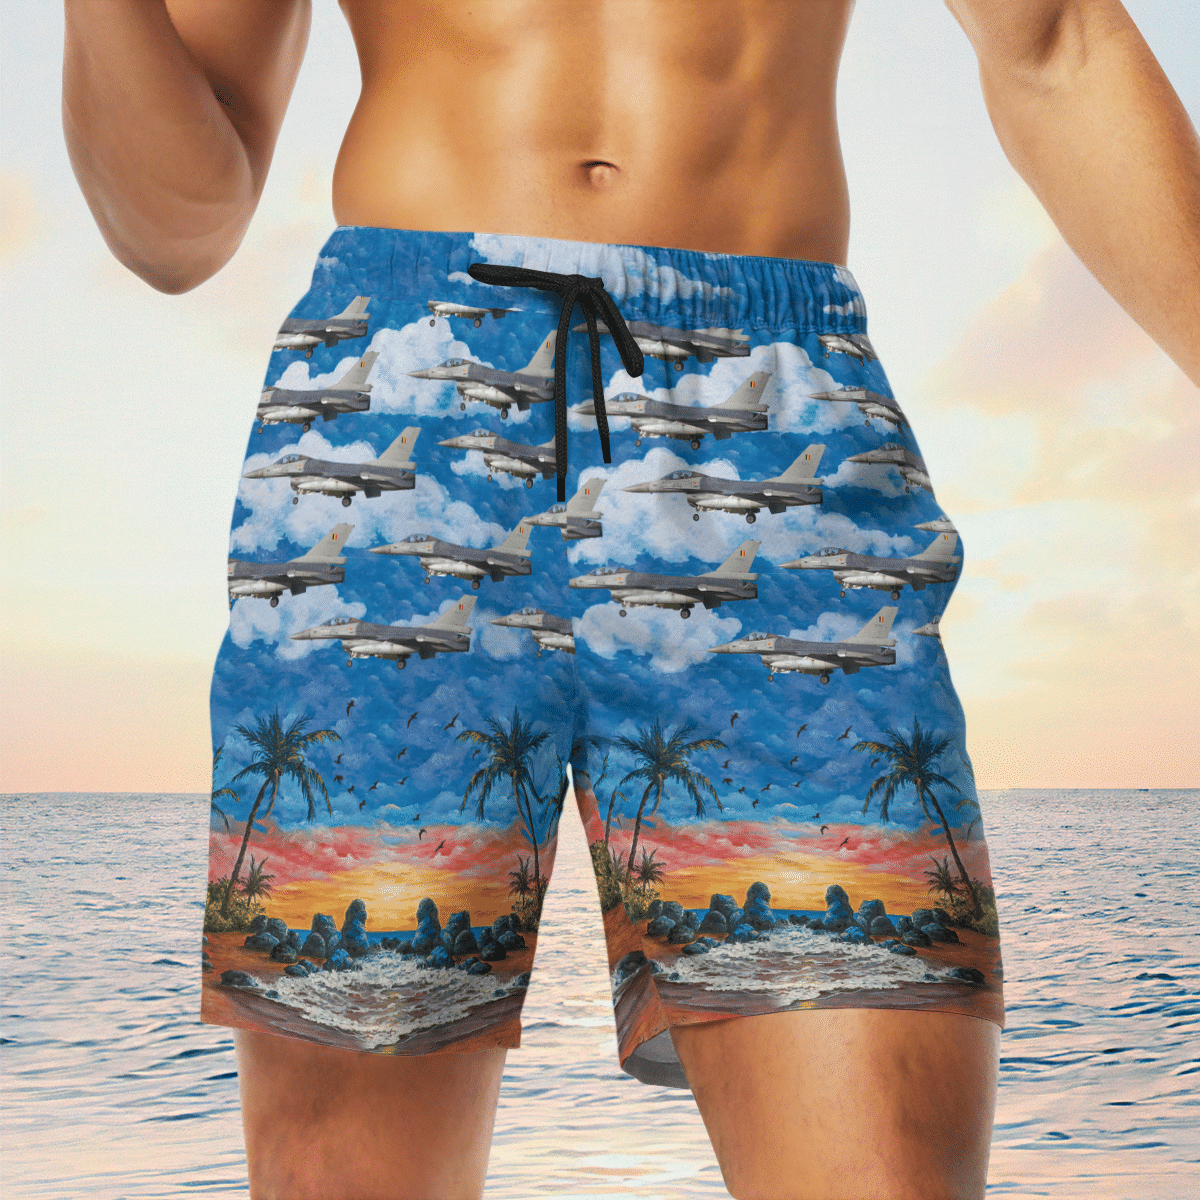 Find yourself a great beachwear here 121